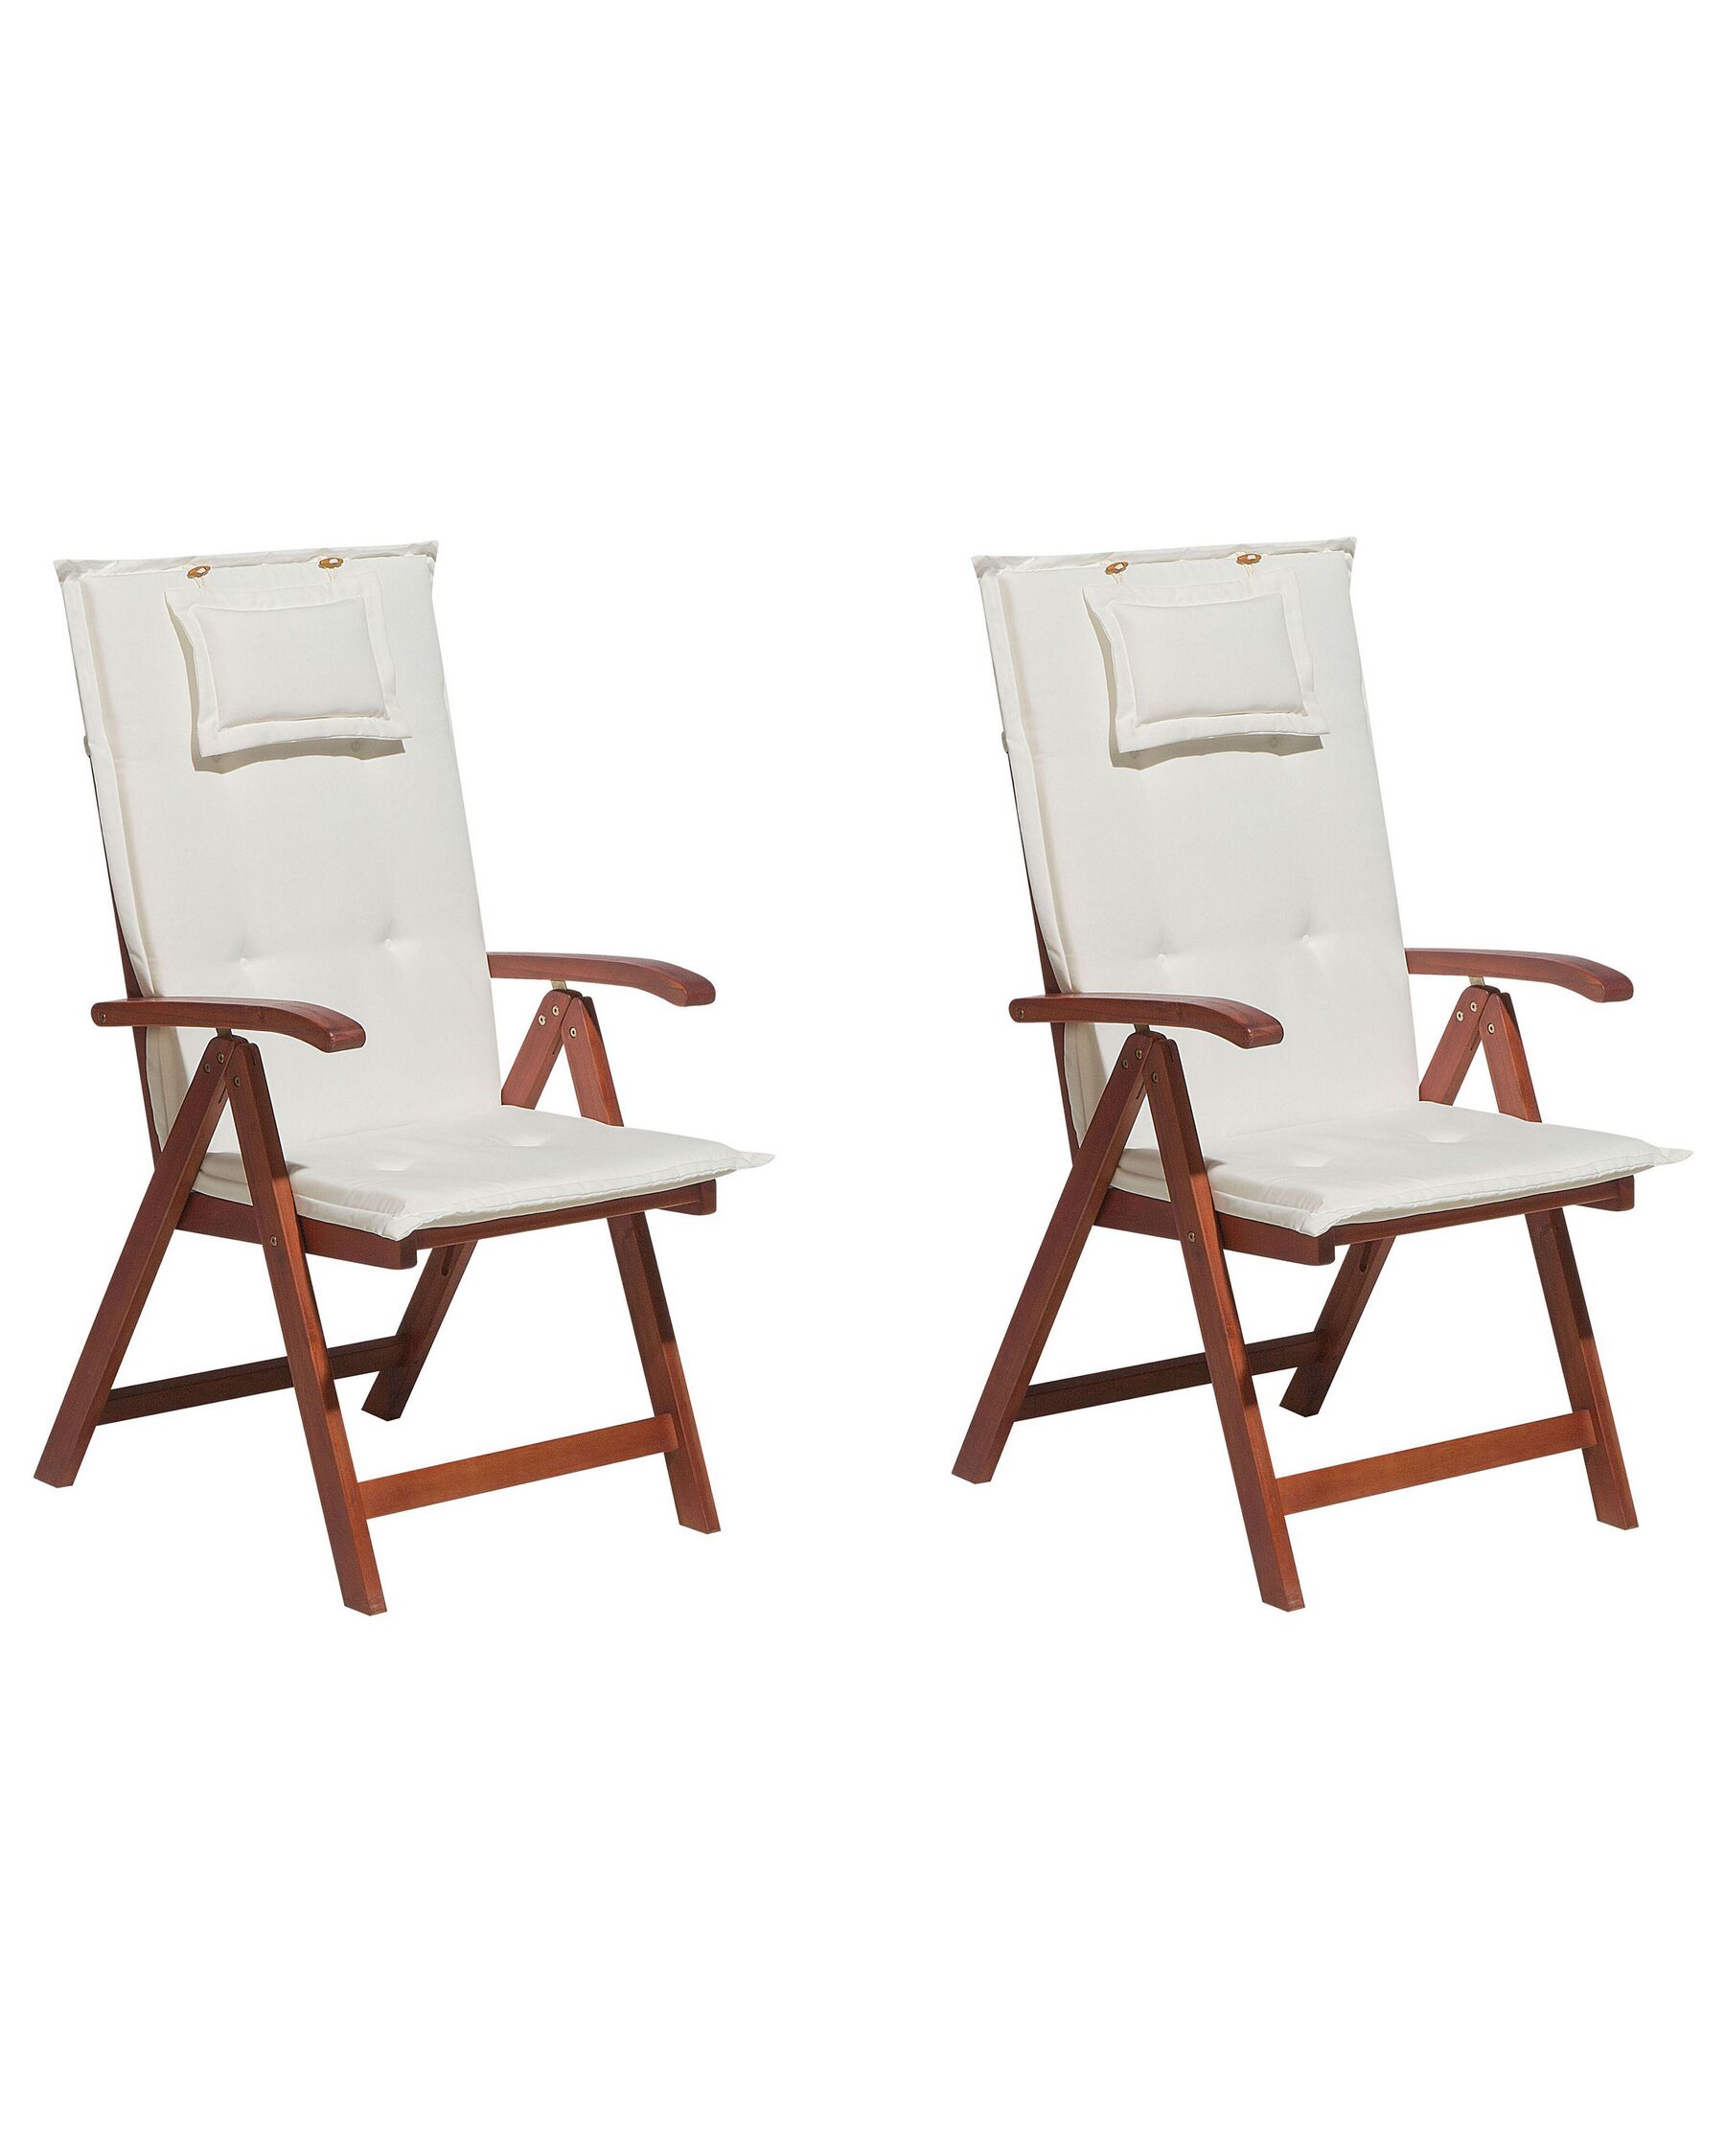 Set of 2 Acacia Garden Folding Chairs with Off-White Cushions TOSCANA_786014